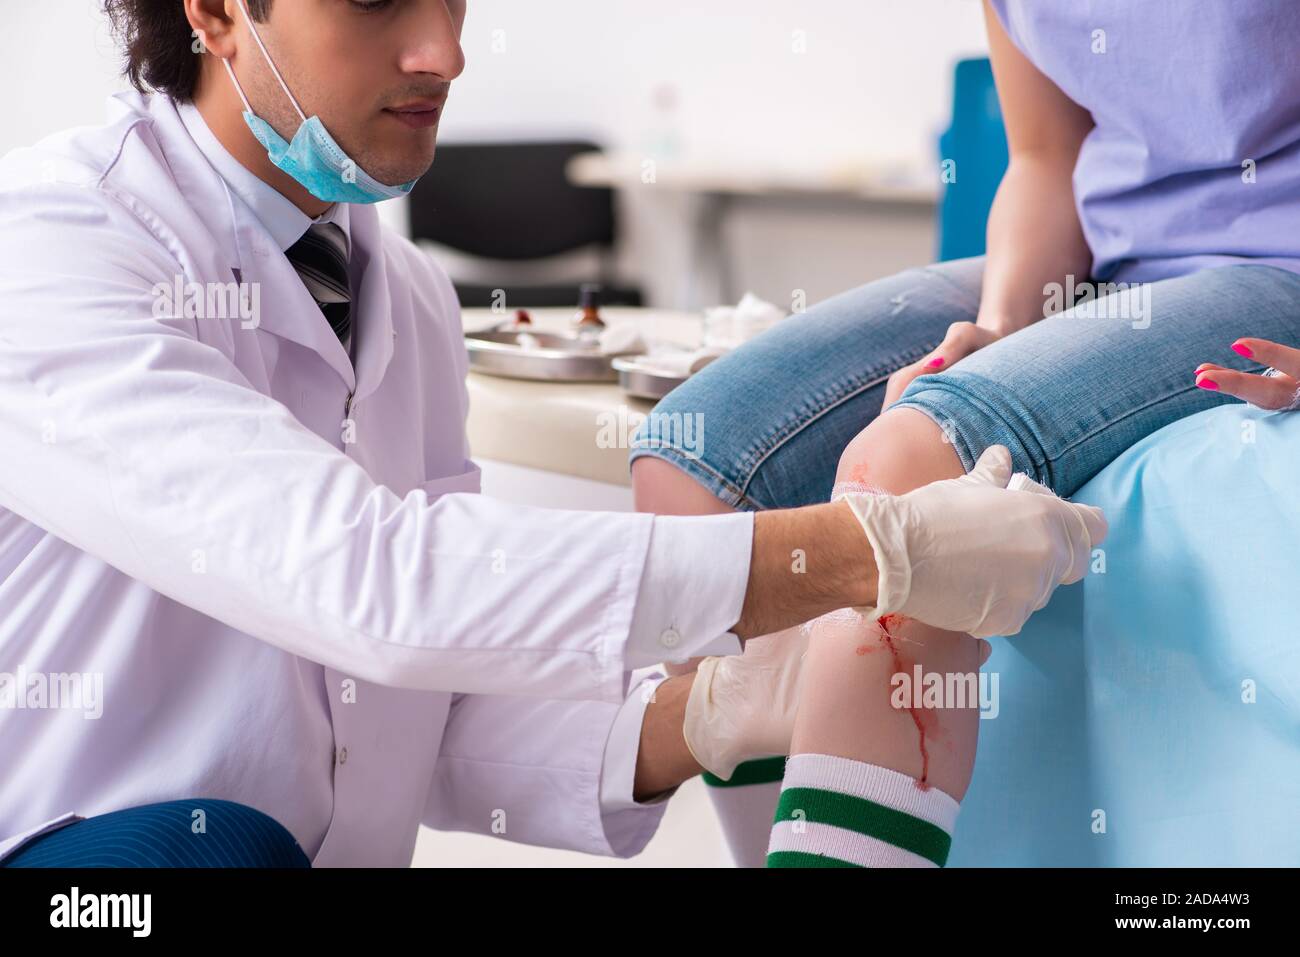 Leg injured young woman visiting male doctor Stock Photo